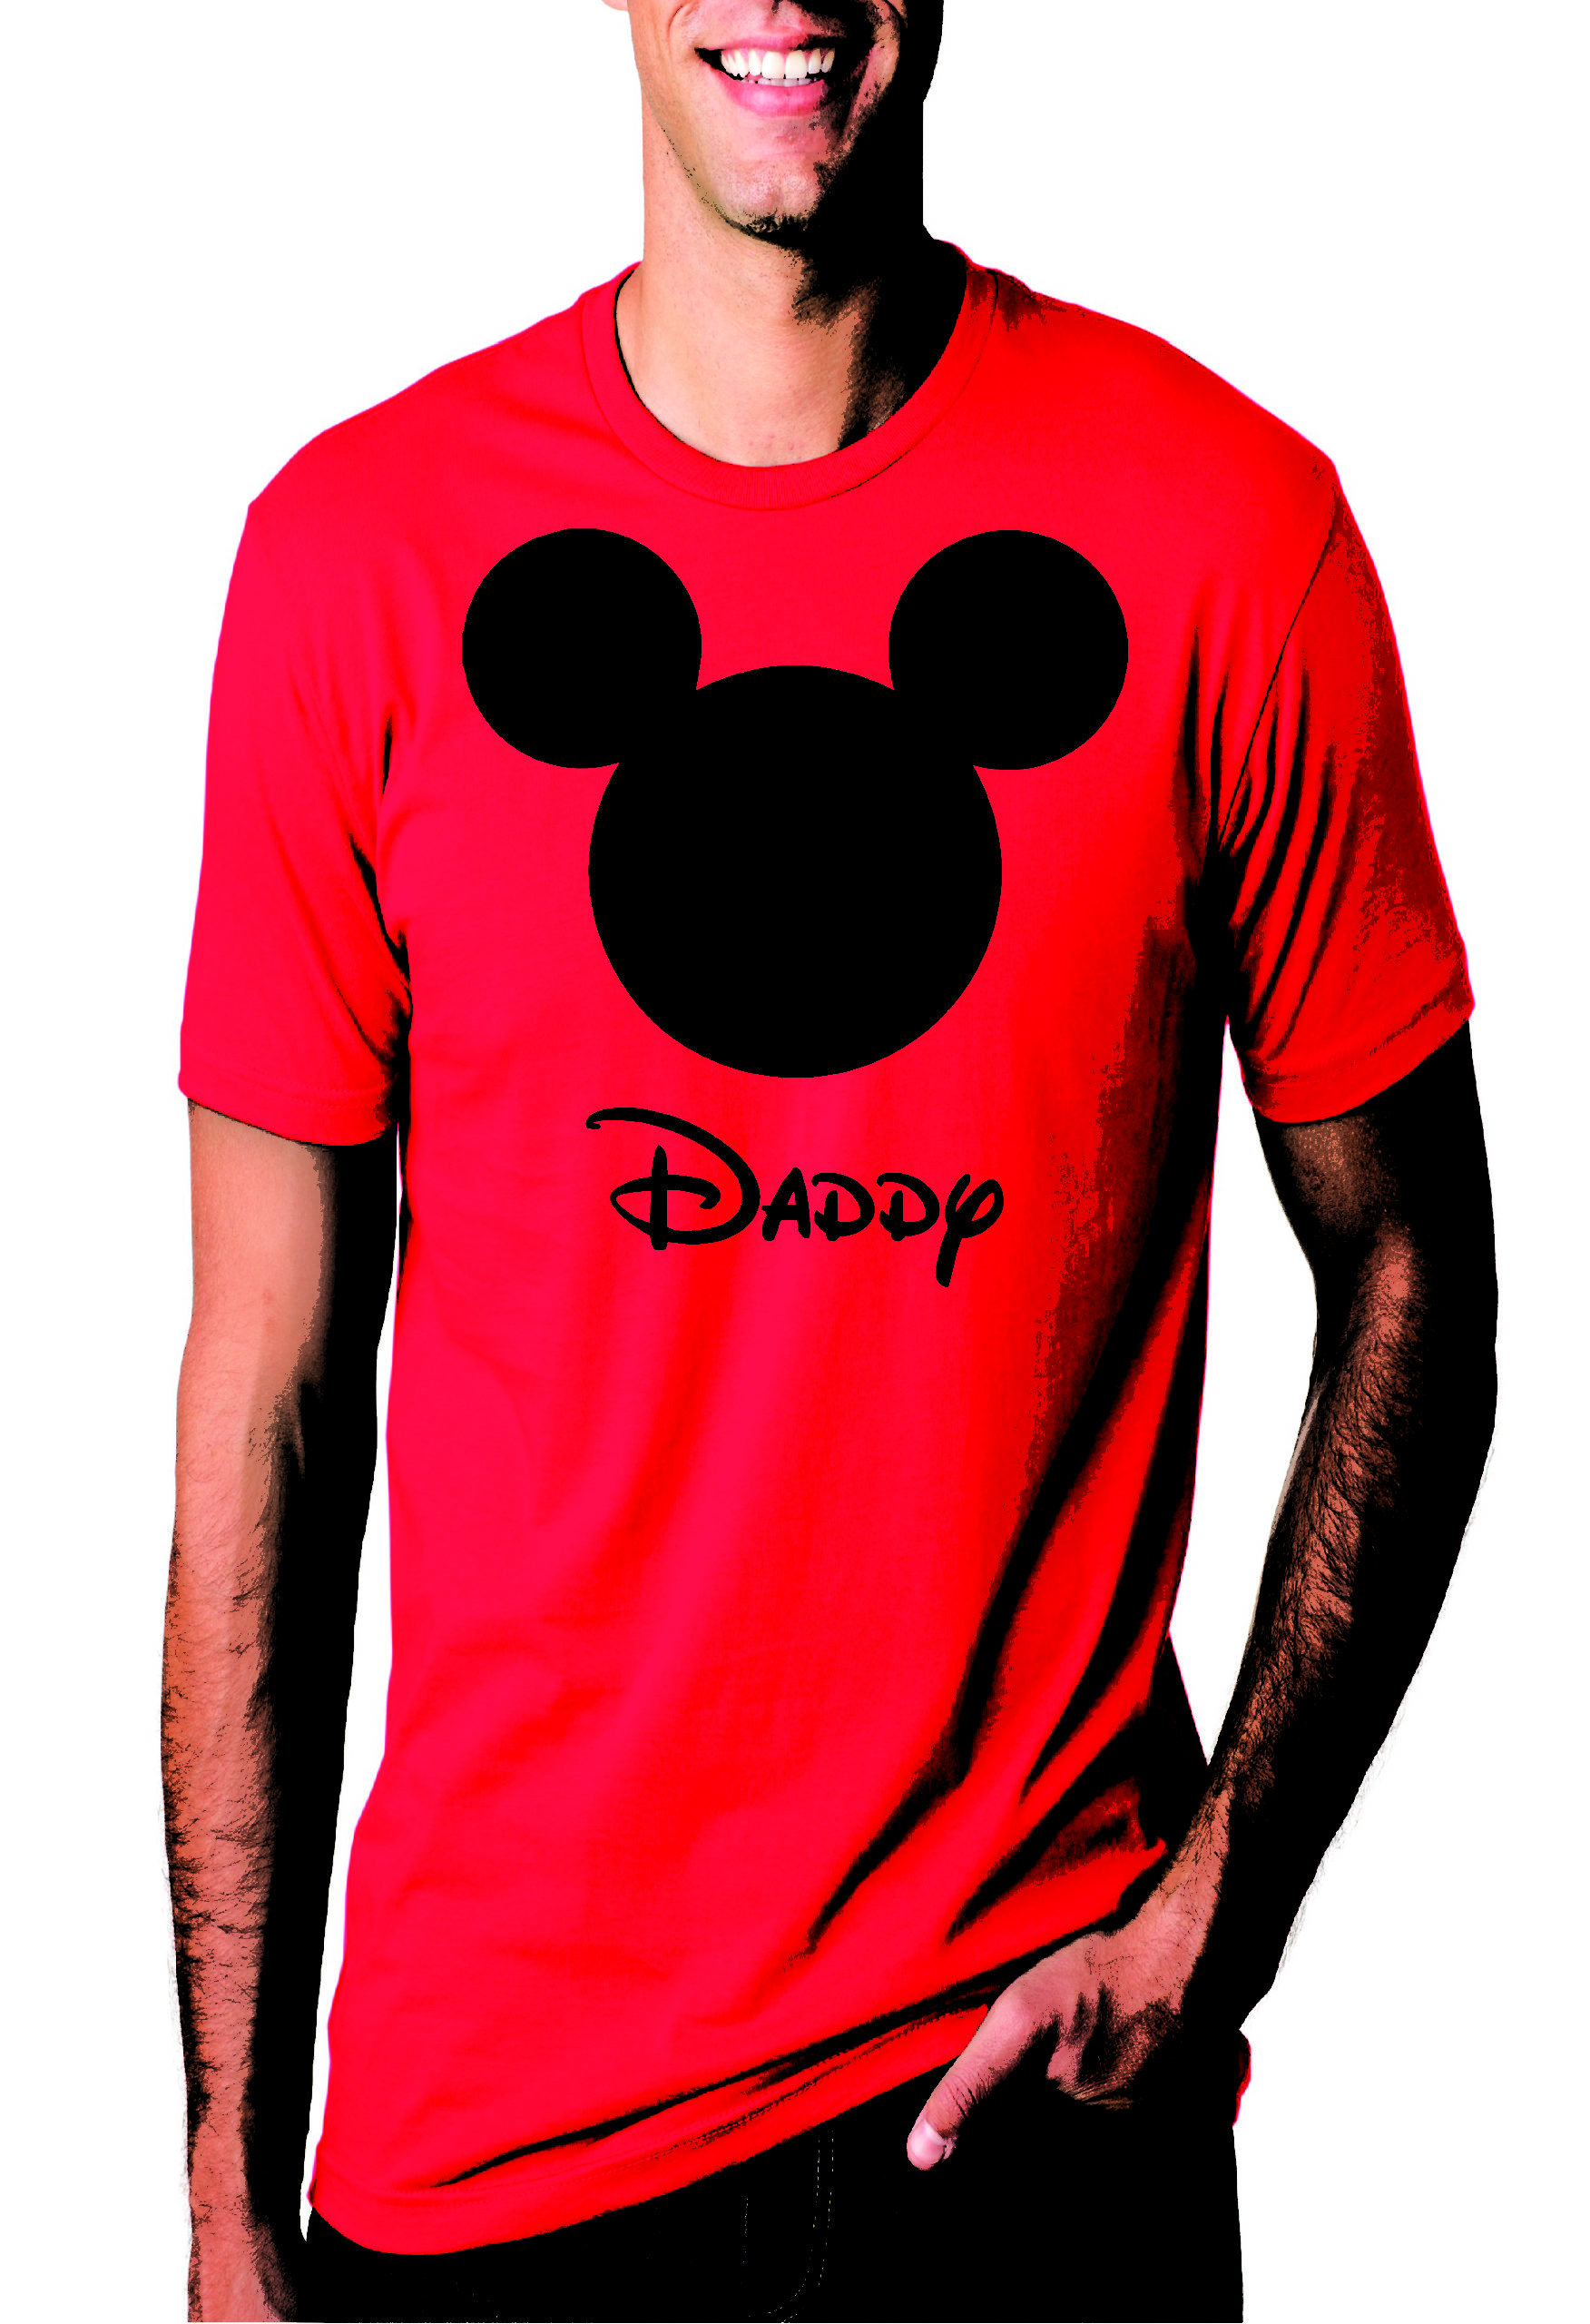 and Stares | T-Shirt Printing Shirts Embroidery Group - Disney